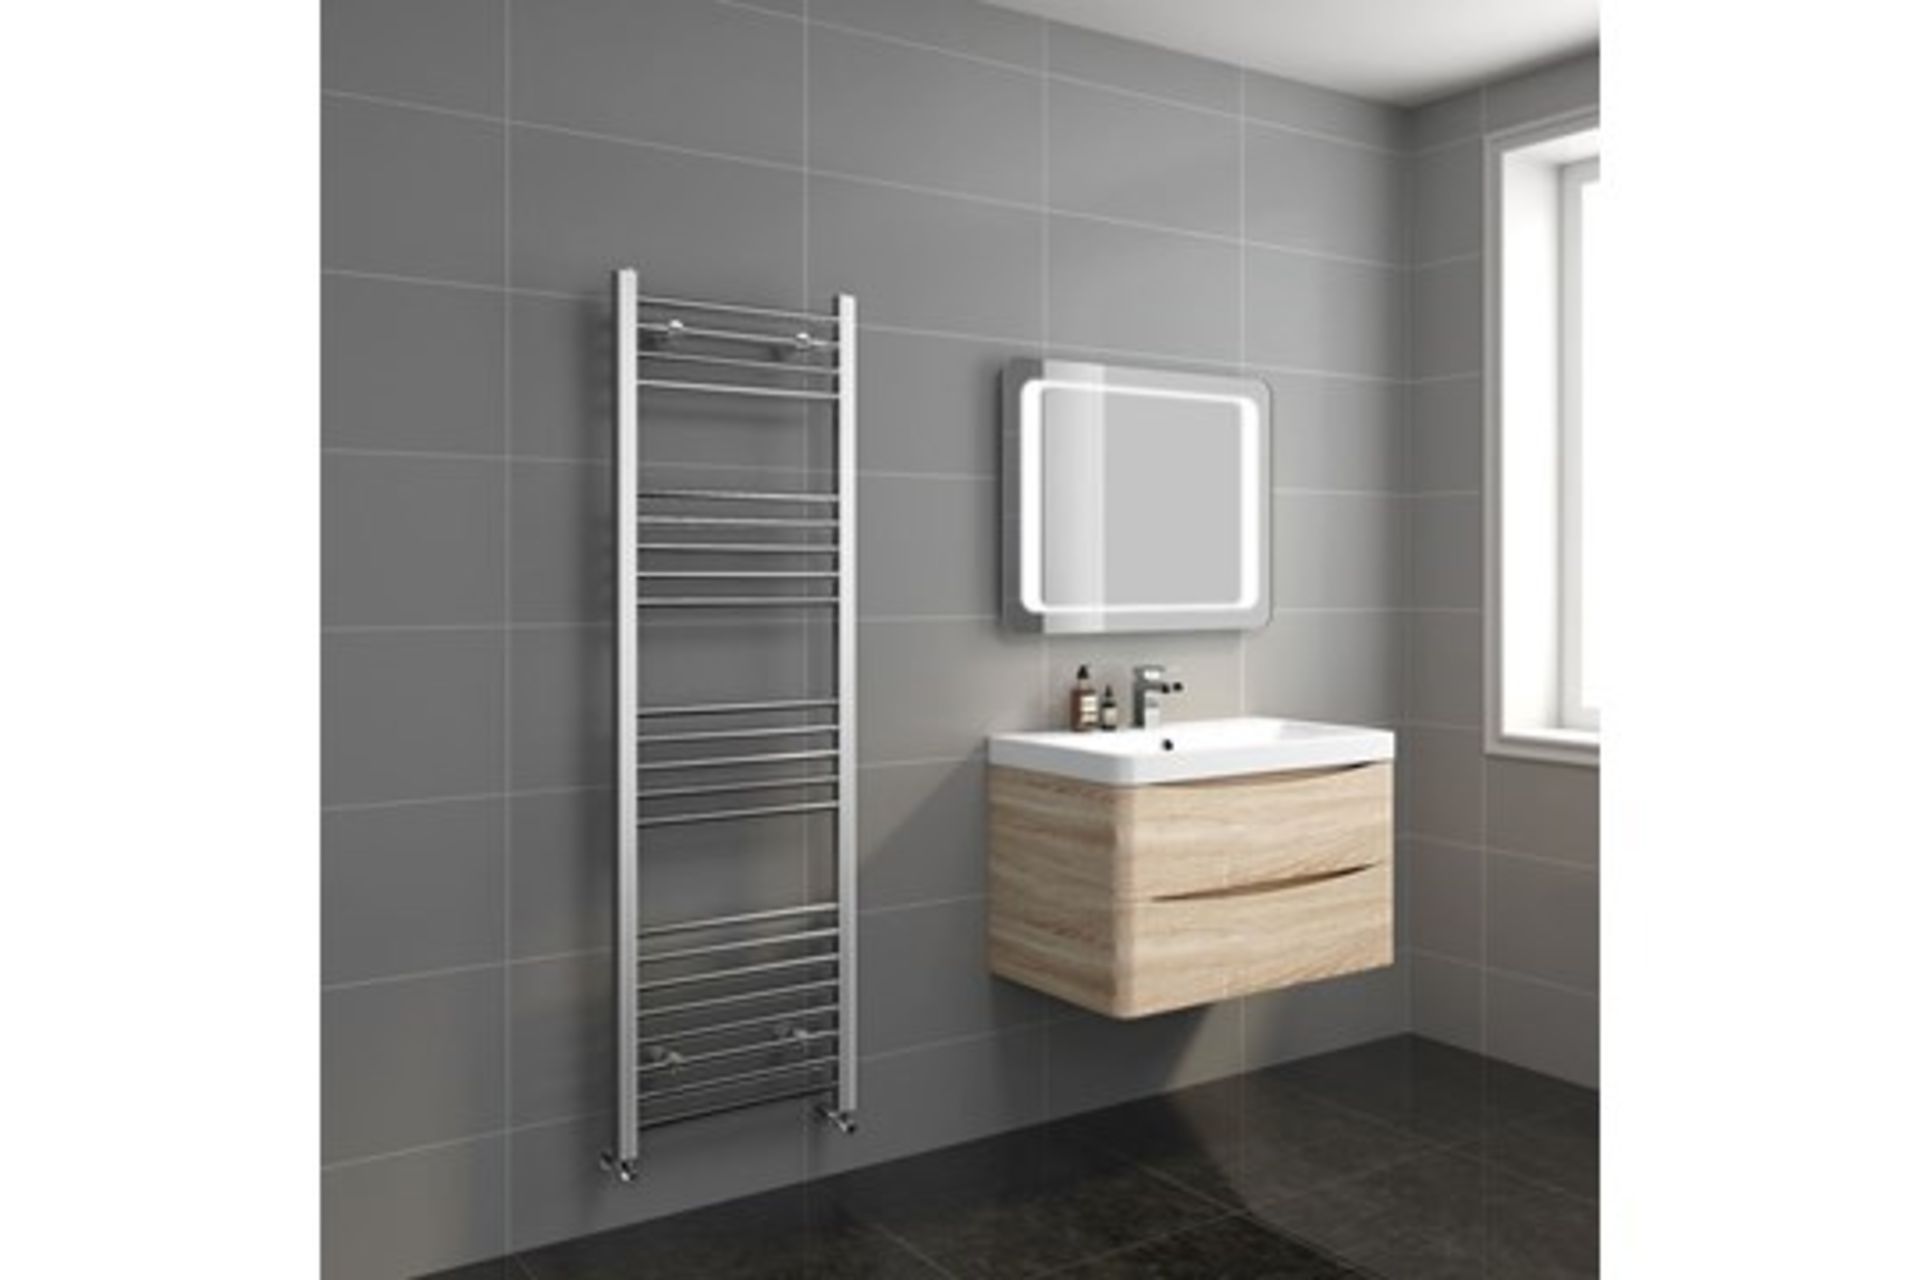 1600x500mm - 20mm Tubes - Chrome Heated Straight Rail Ladder Towel Radiator. NS1600500.Made fro... - Image 2 of 2